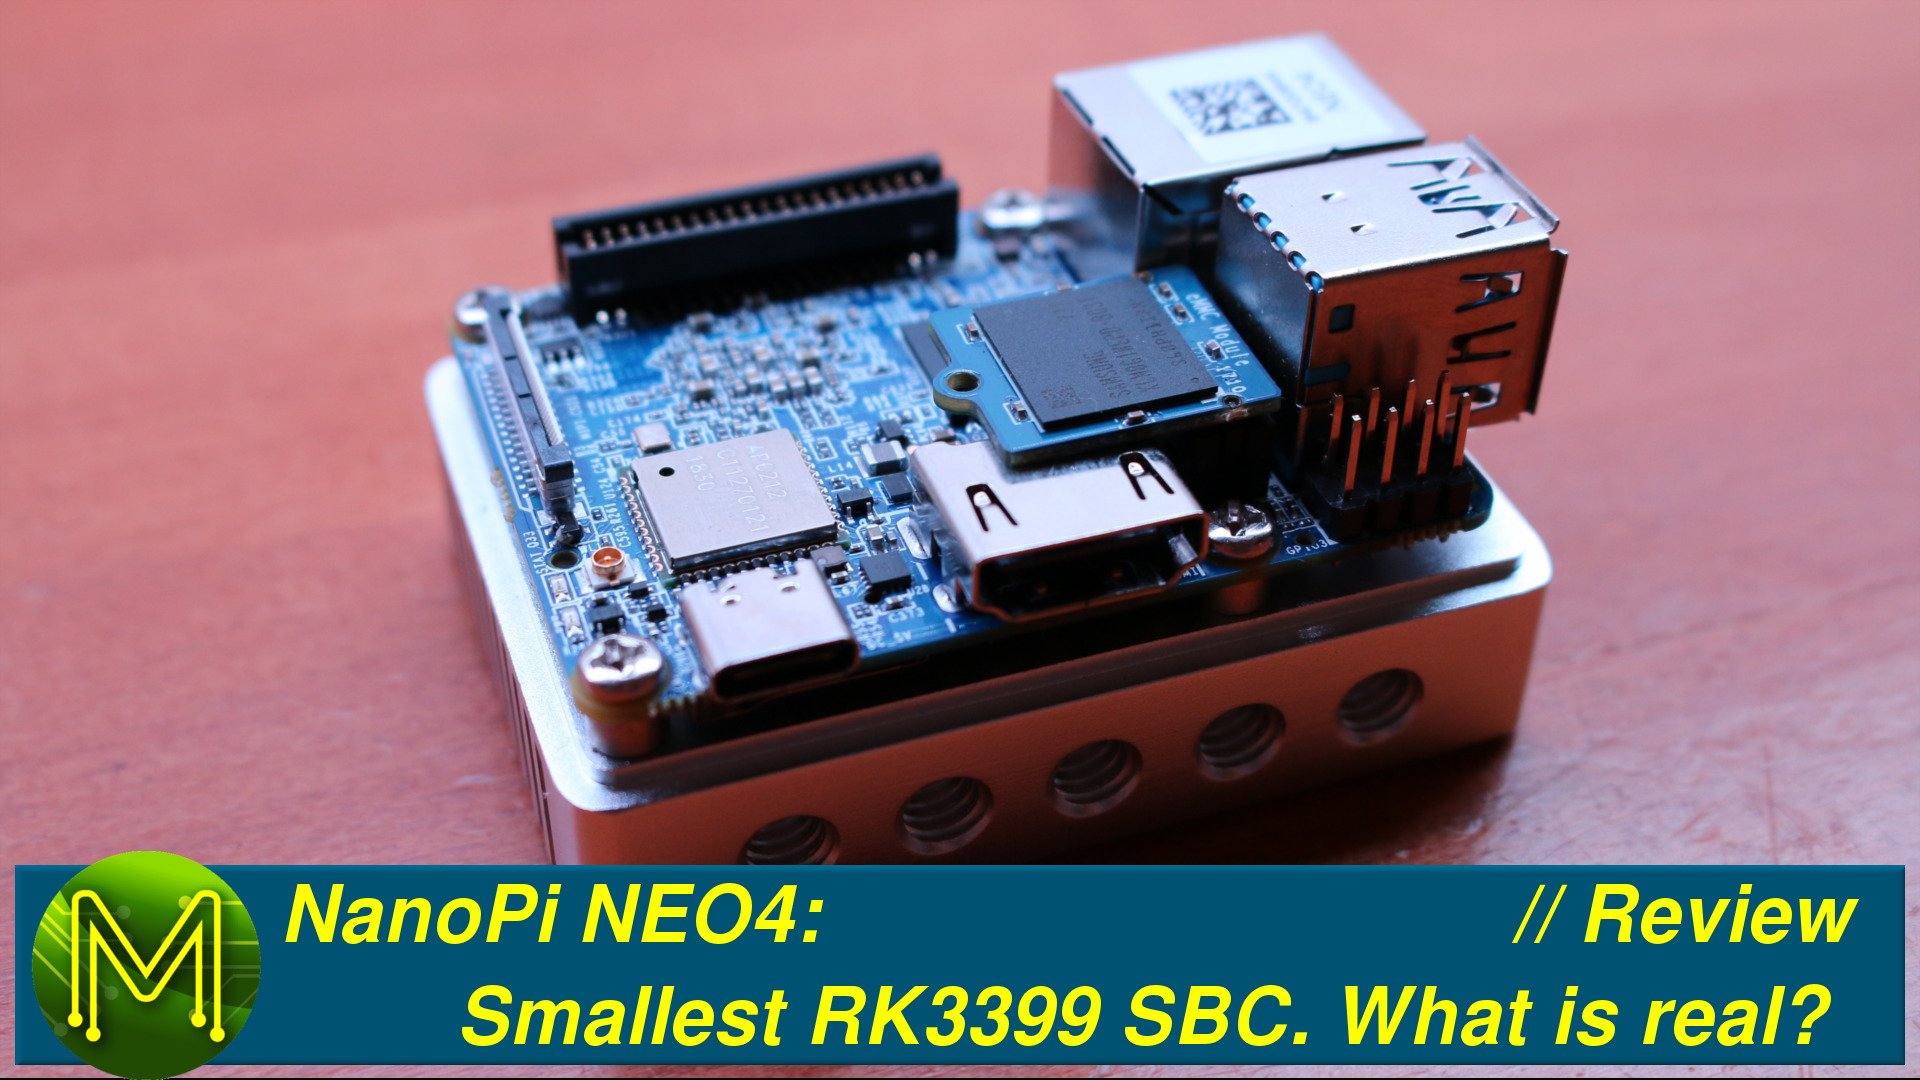 NanoPi NEO4: Smallest RK3399 SBC. What is real, NEO? // Review